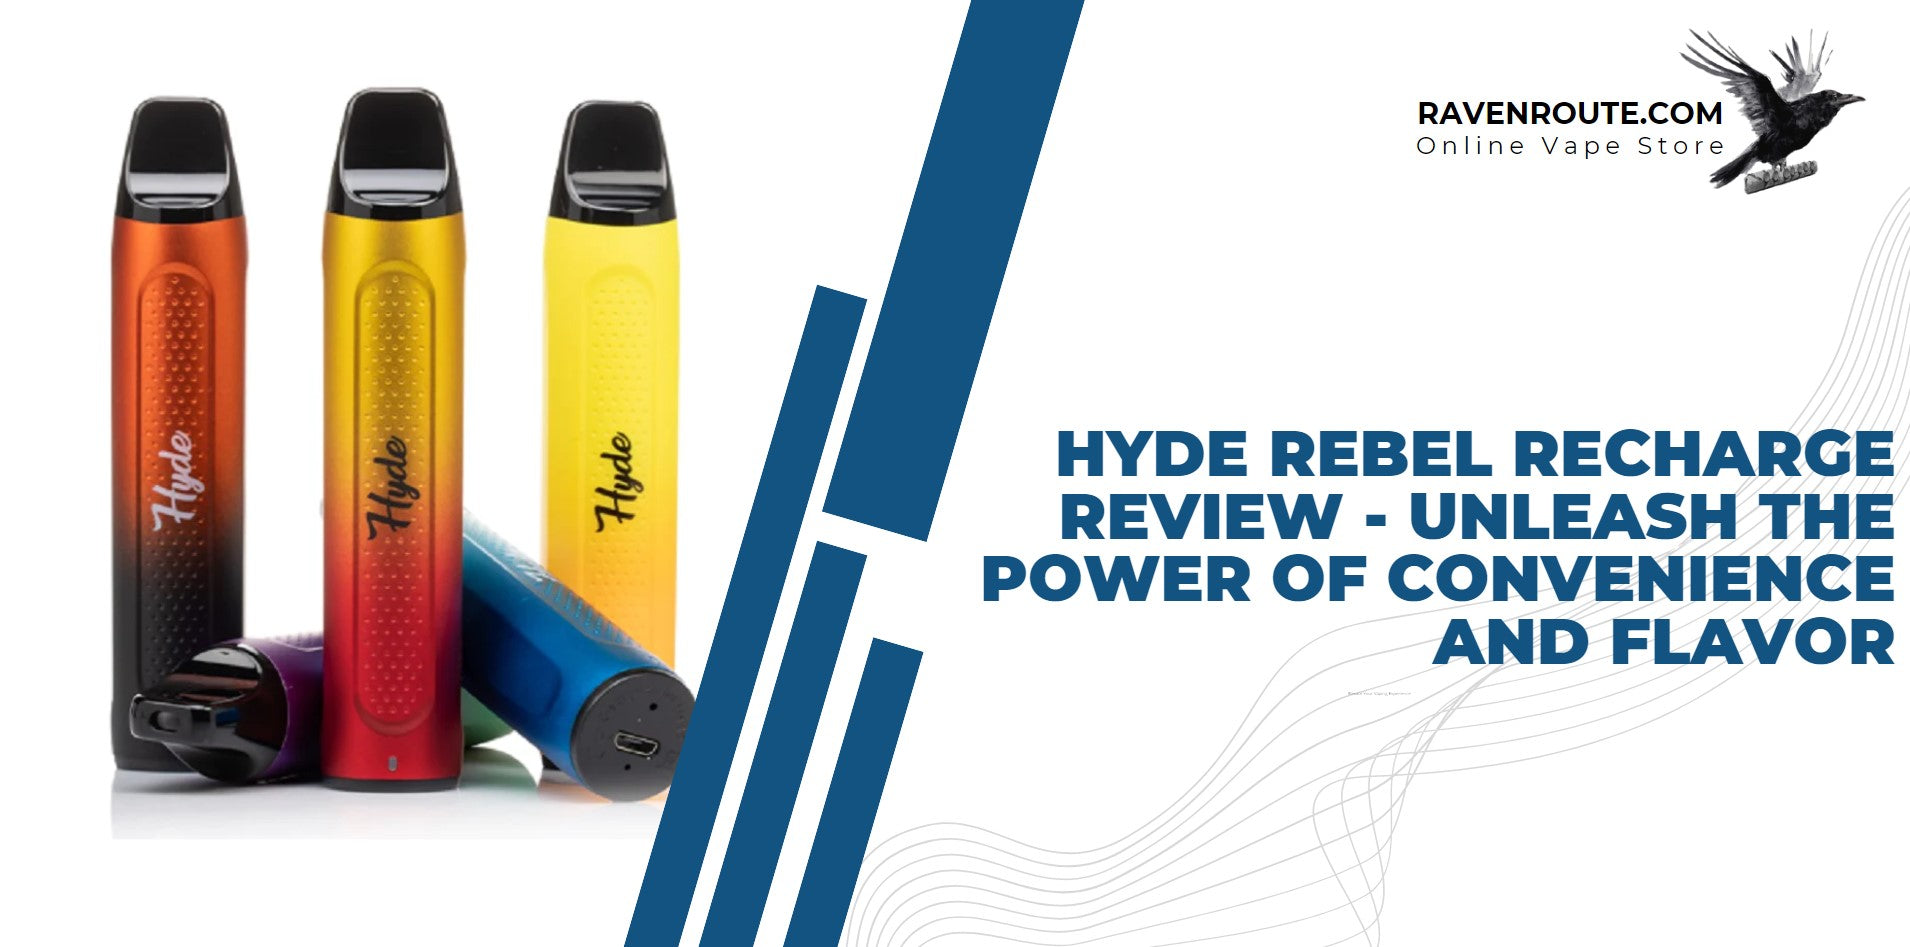 Hyde Rebel Recharge Review - Unleash the Power of Convenience and Flavor